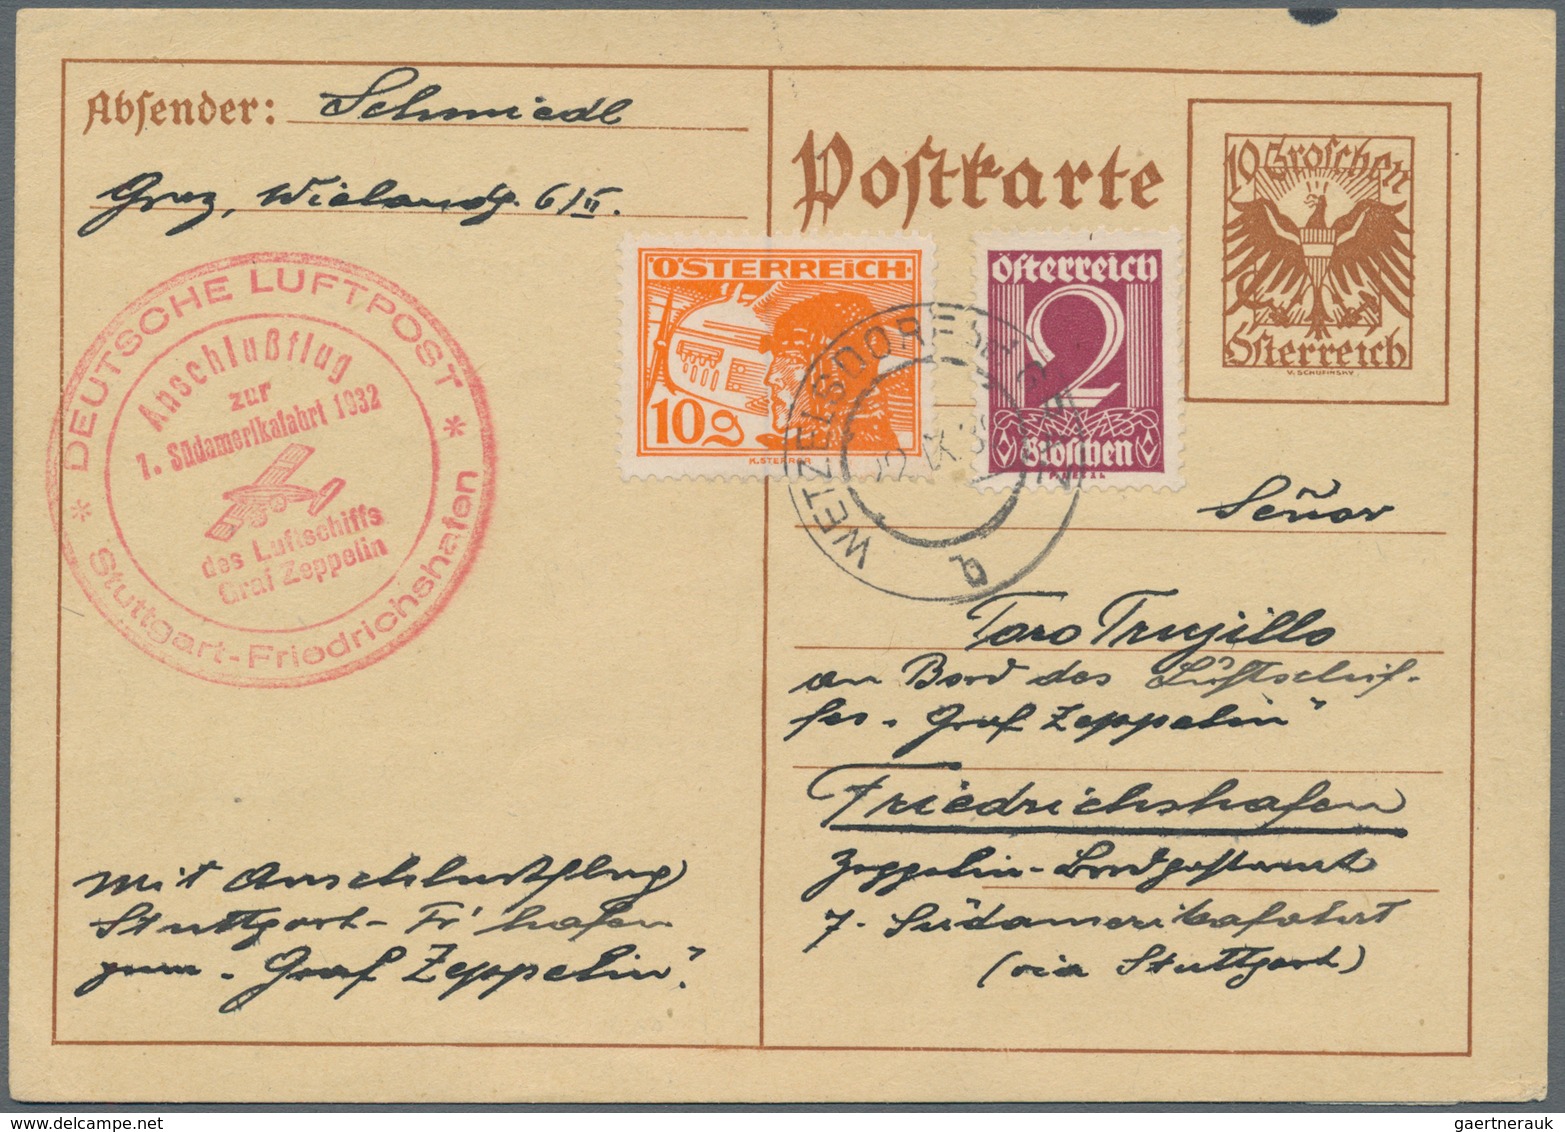 Zeppelinpost Europa: 1932. Upfranked Austrian Ganzsache / Postal Stationery Card With Cachet For Bei - Europe (Other)